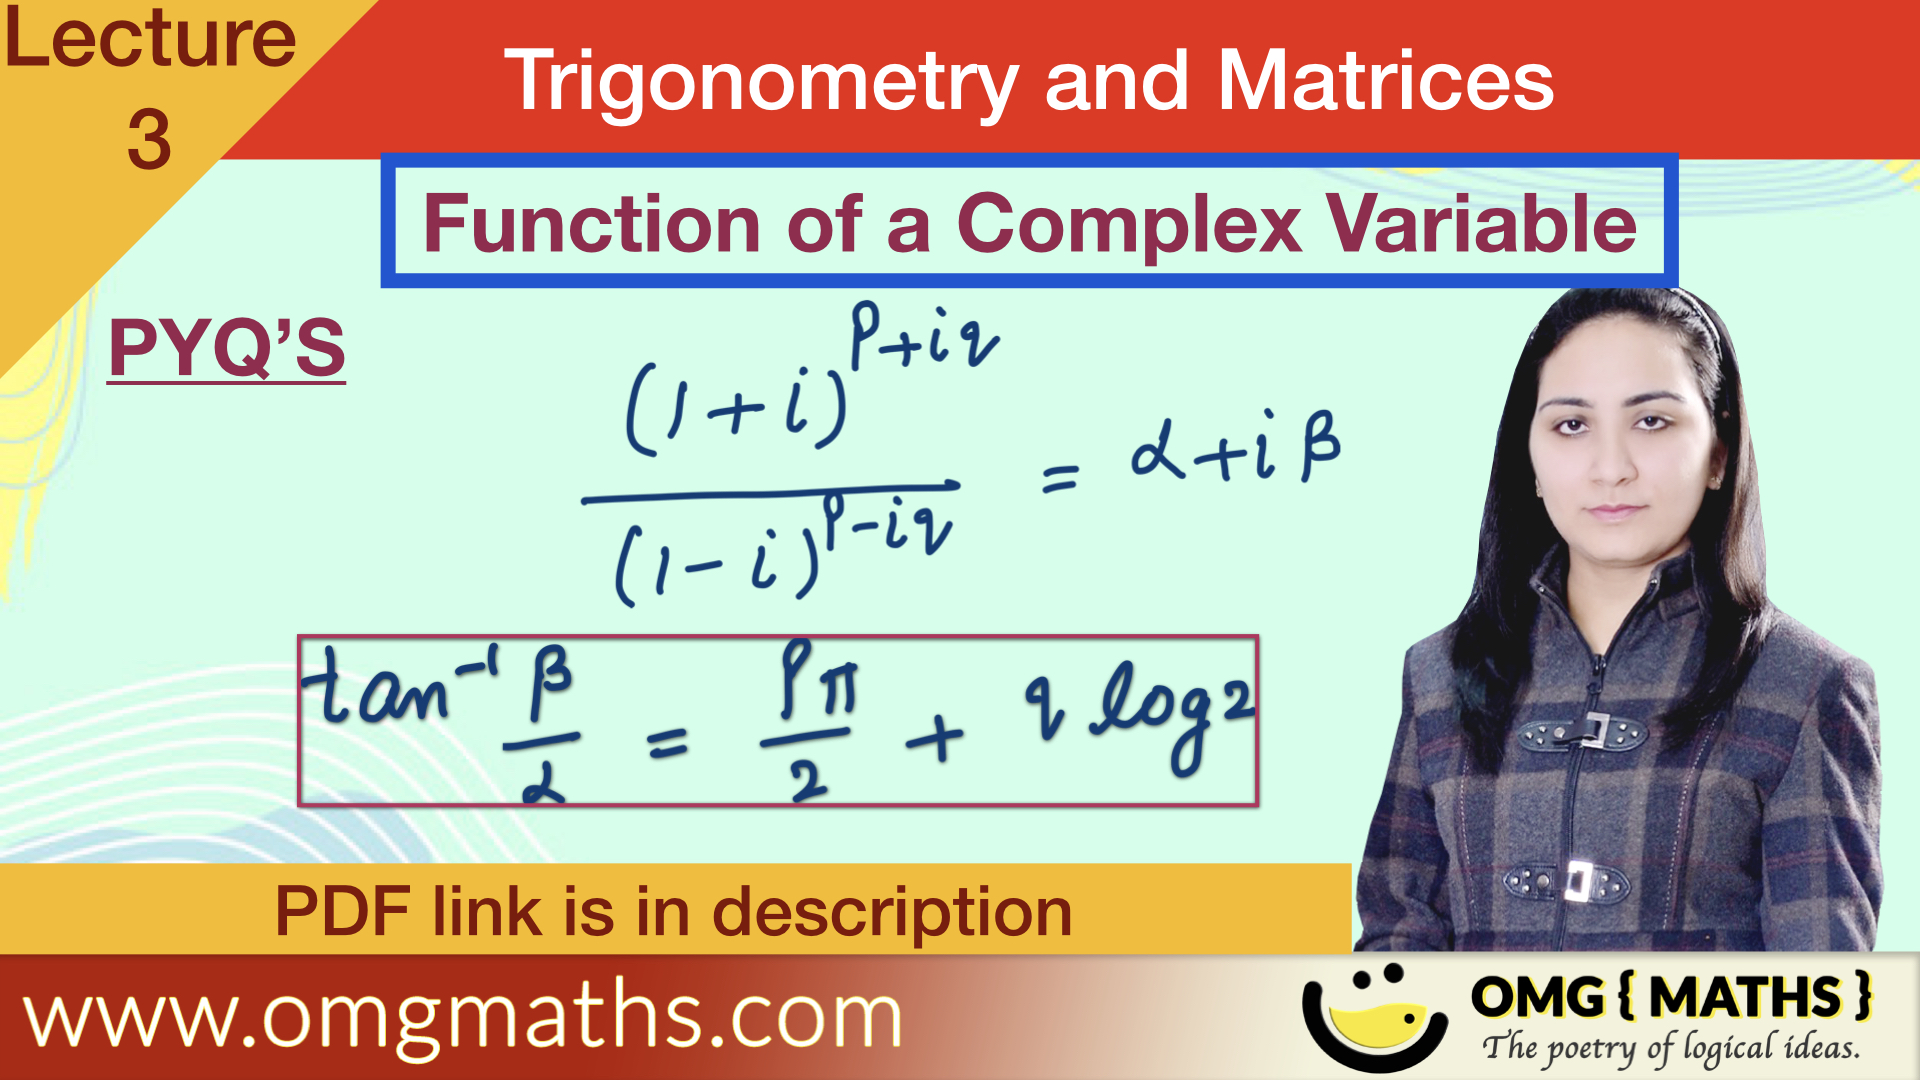 [(1+i)^(p+iq)]/[(1-i)^(p-iq)] = A+iB | Function of a complex variable | pyq | Bsc | Trigonometry and Matrices